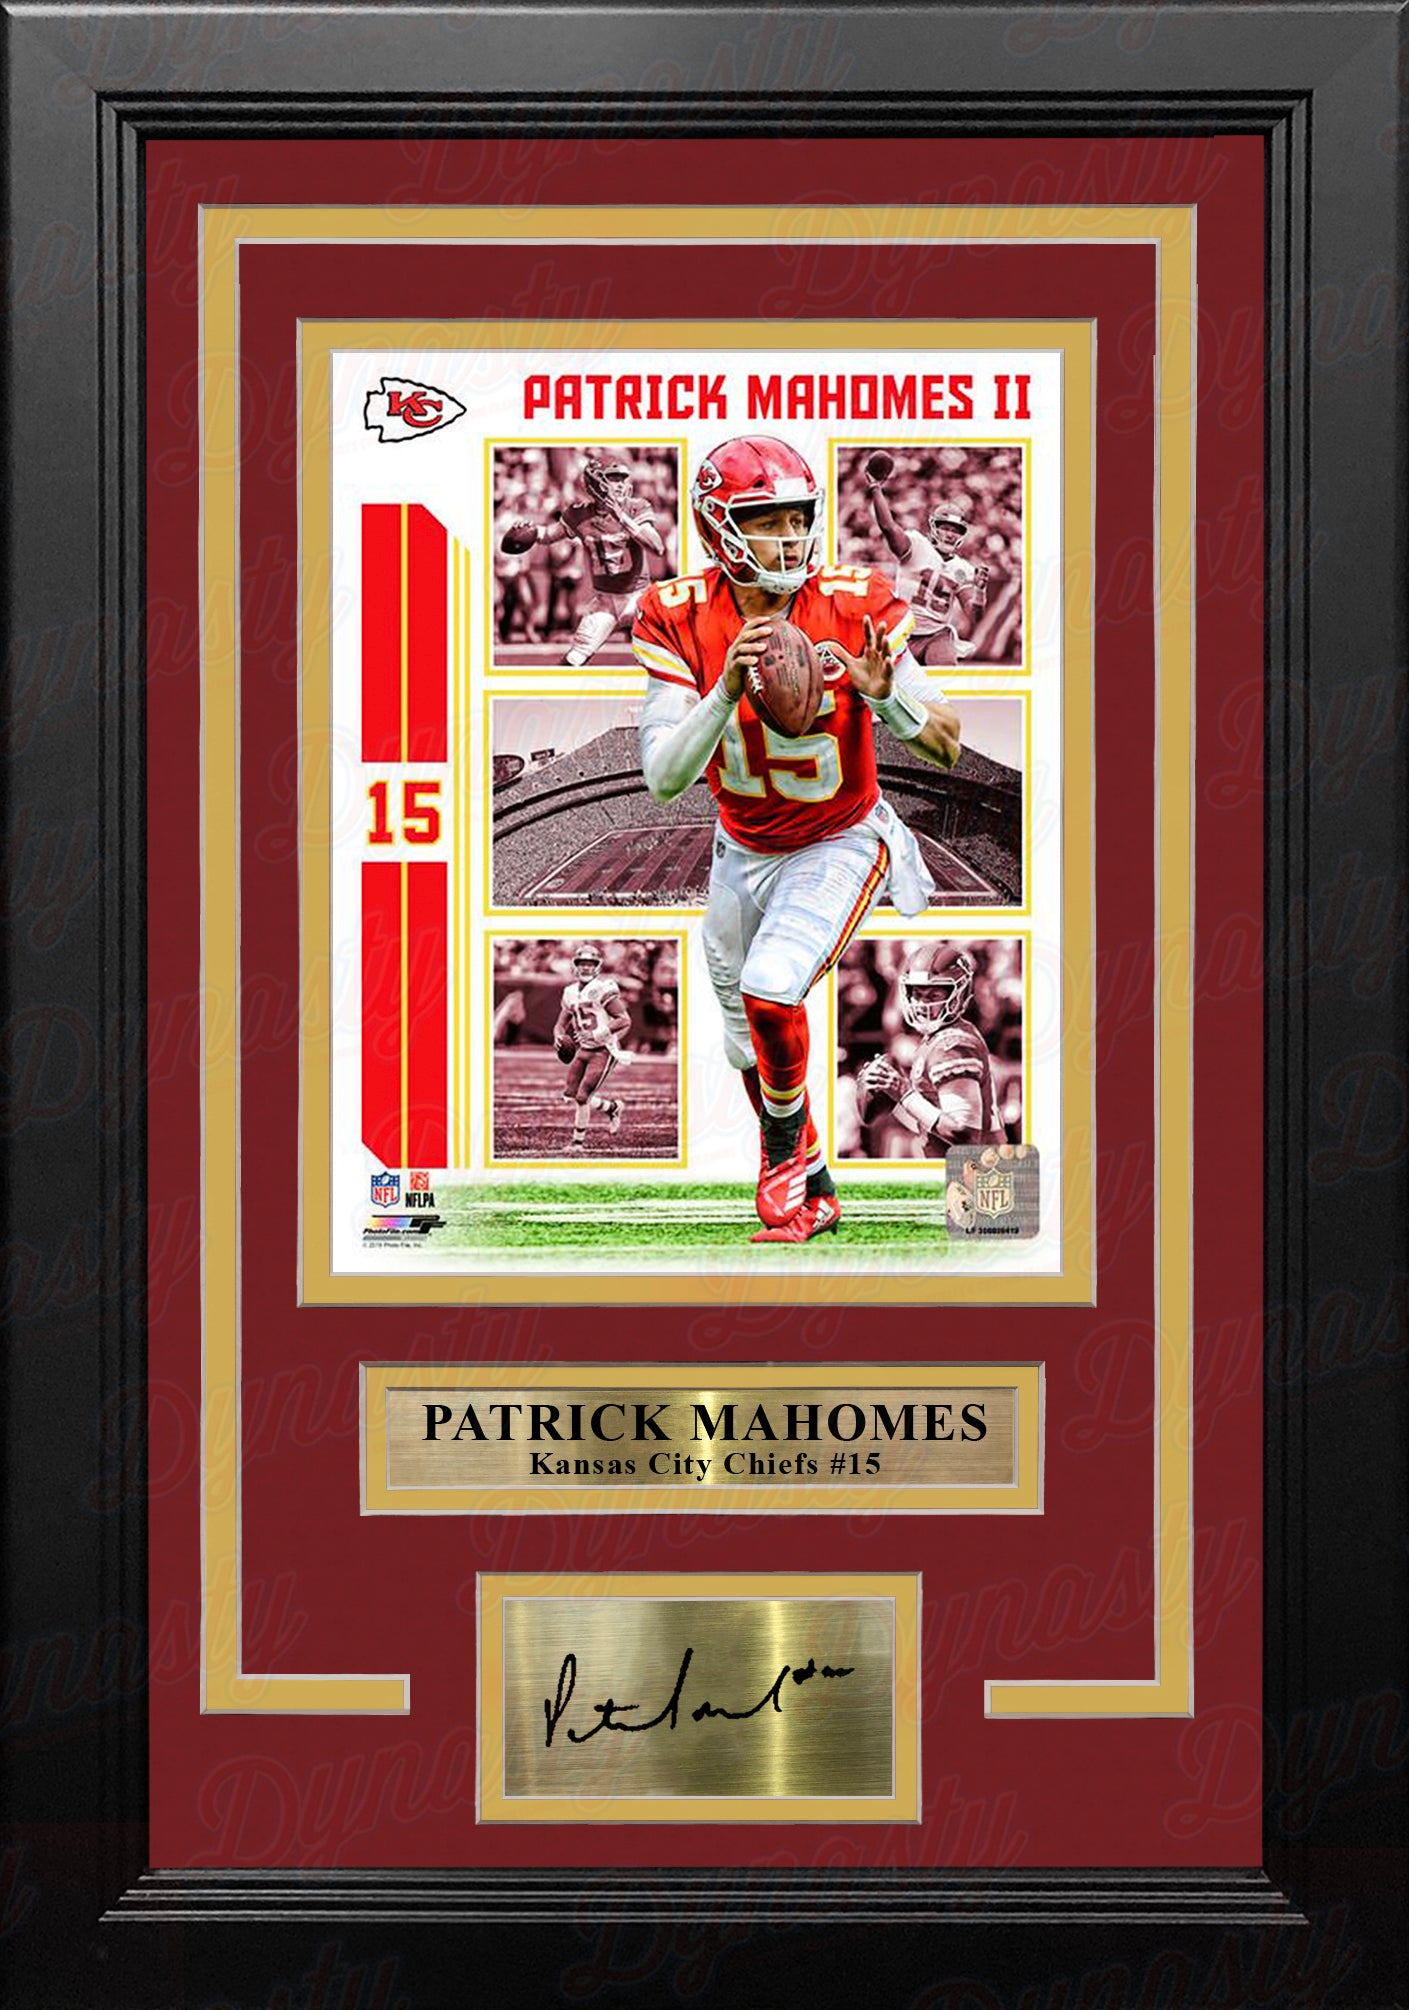 Patrick Mahomes Kansas City Chiefs 8" x 10" Framed Football Collage Photo with Engraved Autograph - Dynasty Sports & Framing 